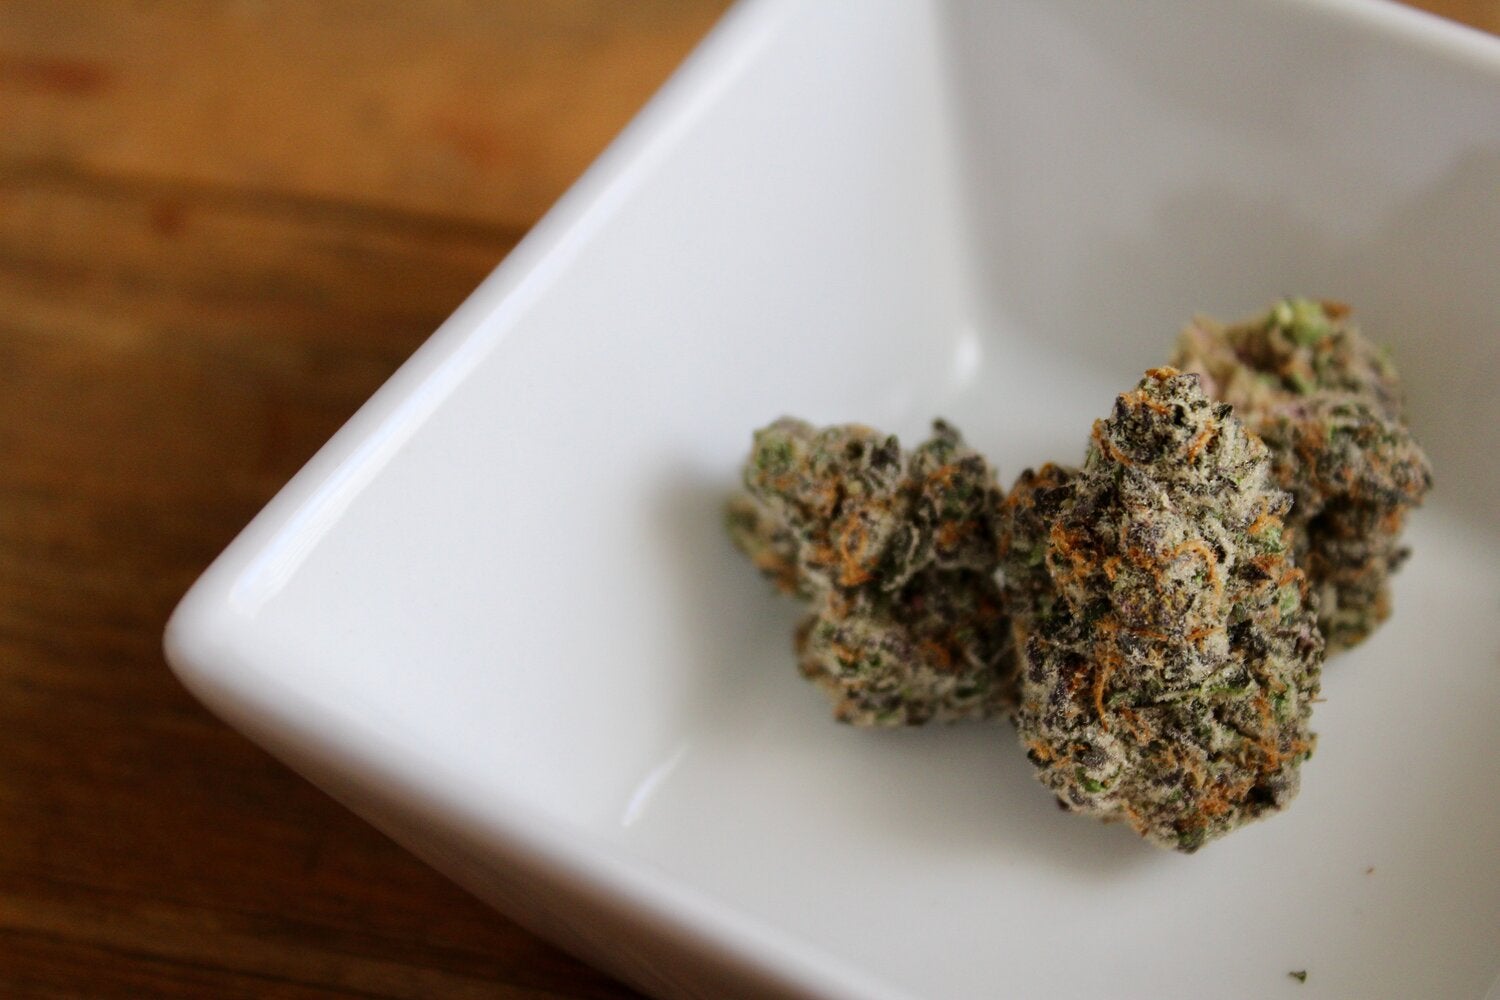 When It Comes to Cannabis, Does Size Really Matter?